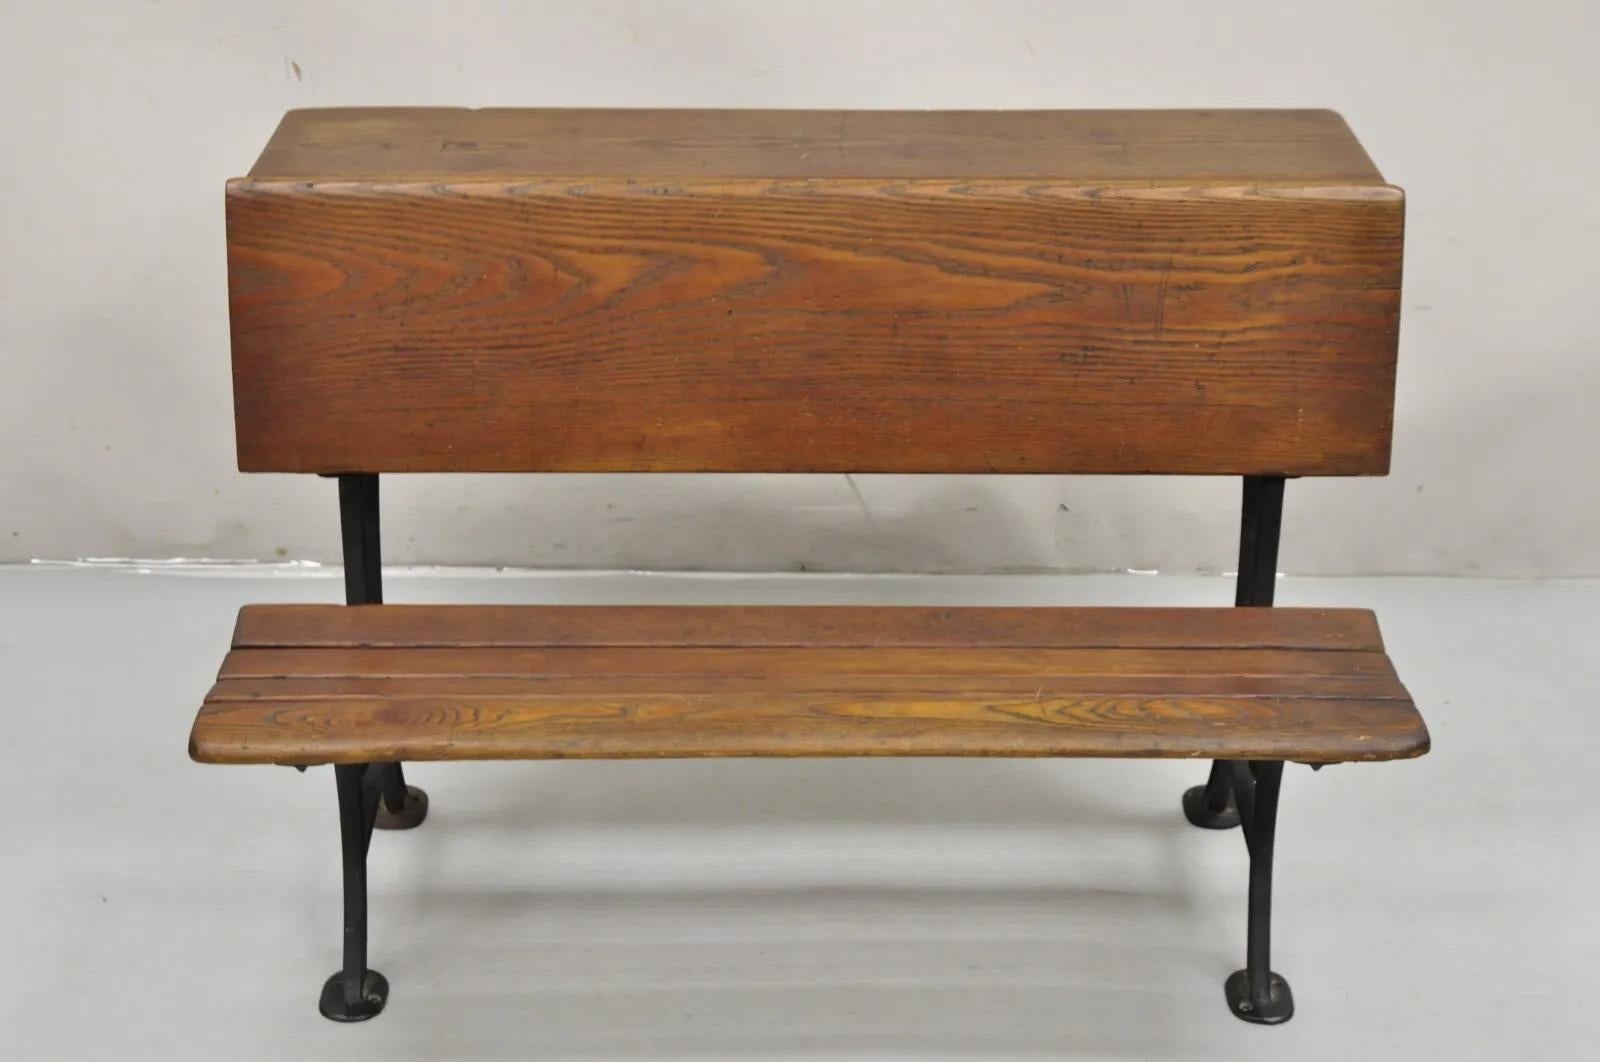 Antique Victorian Wood & Cast Iron Children's School Desk w/ Folding Bench Seat. Item features cast iron supports, folding seat, solid wood construction, rear facing cubby entry, very nice antique school desk. Circa 1800s. Measurements: 25.5